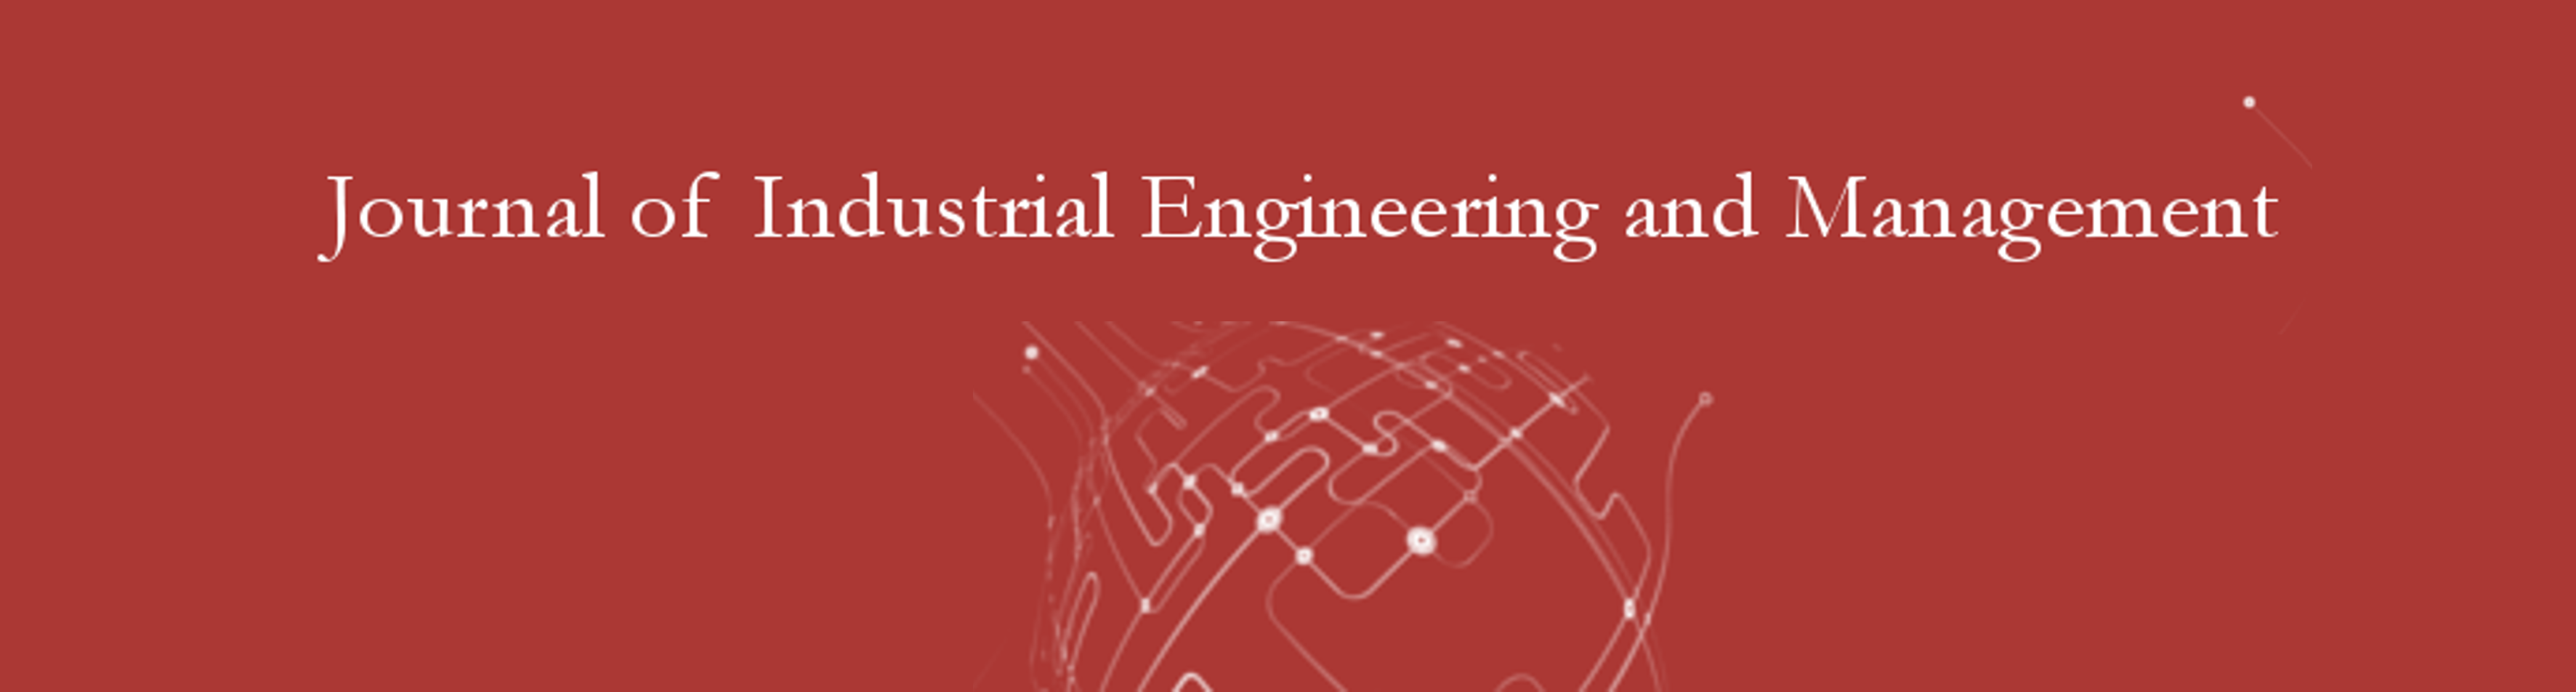 Journal of Industrial Engineering and Management